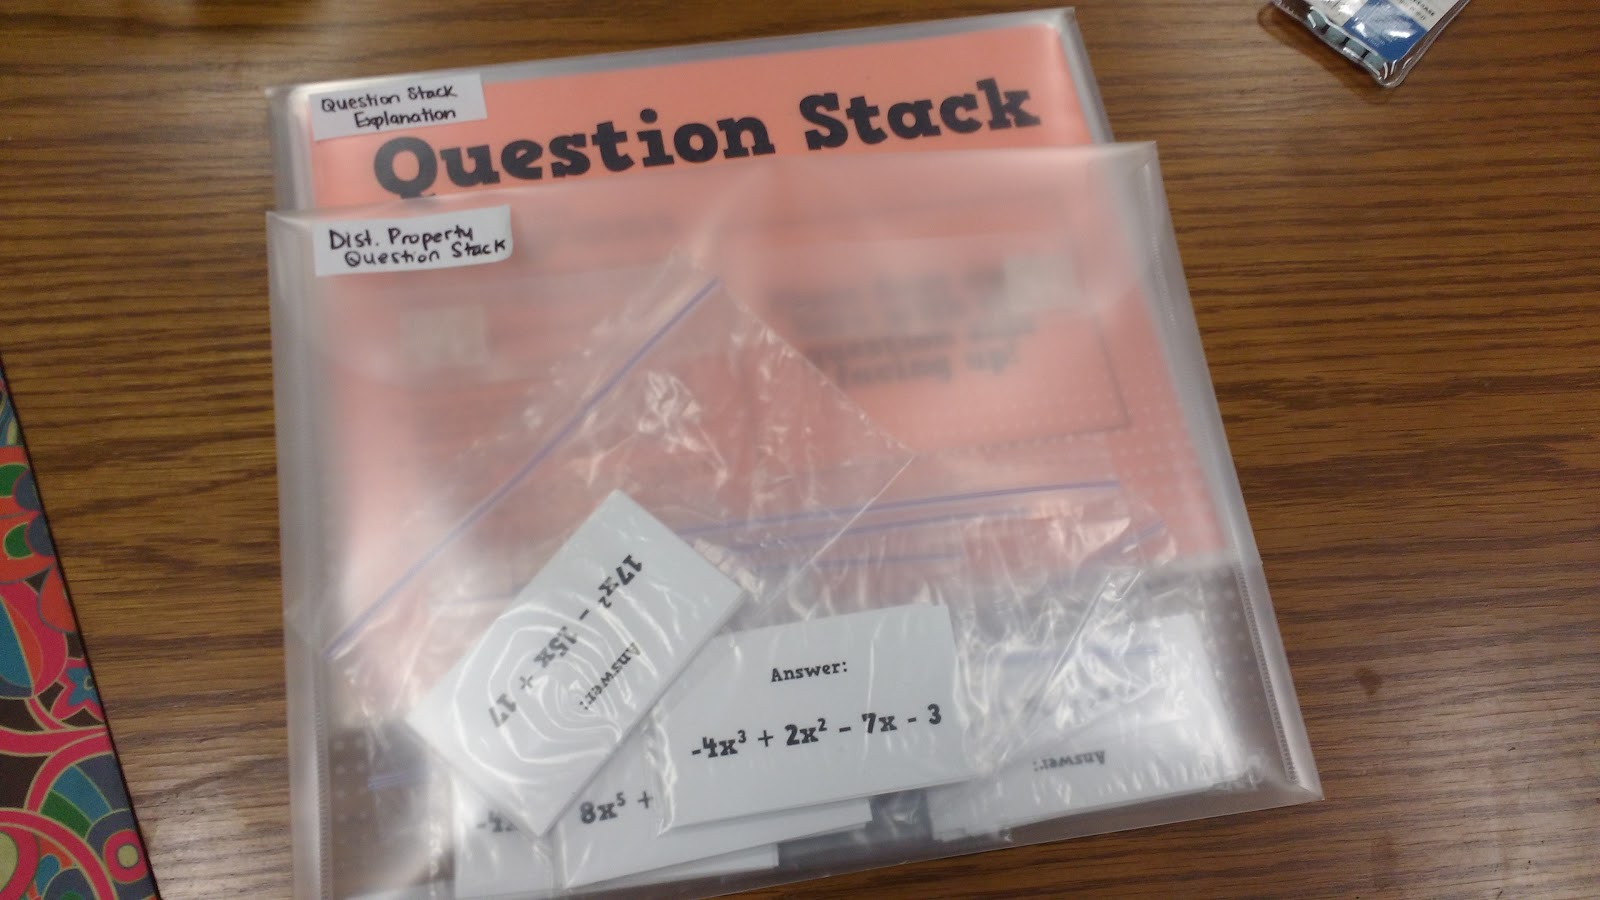 distributive property question stack supplies. 